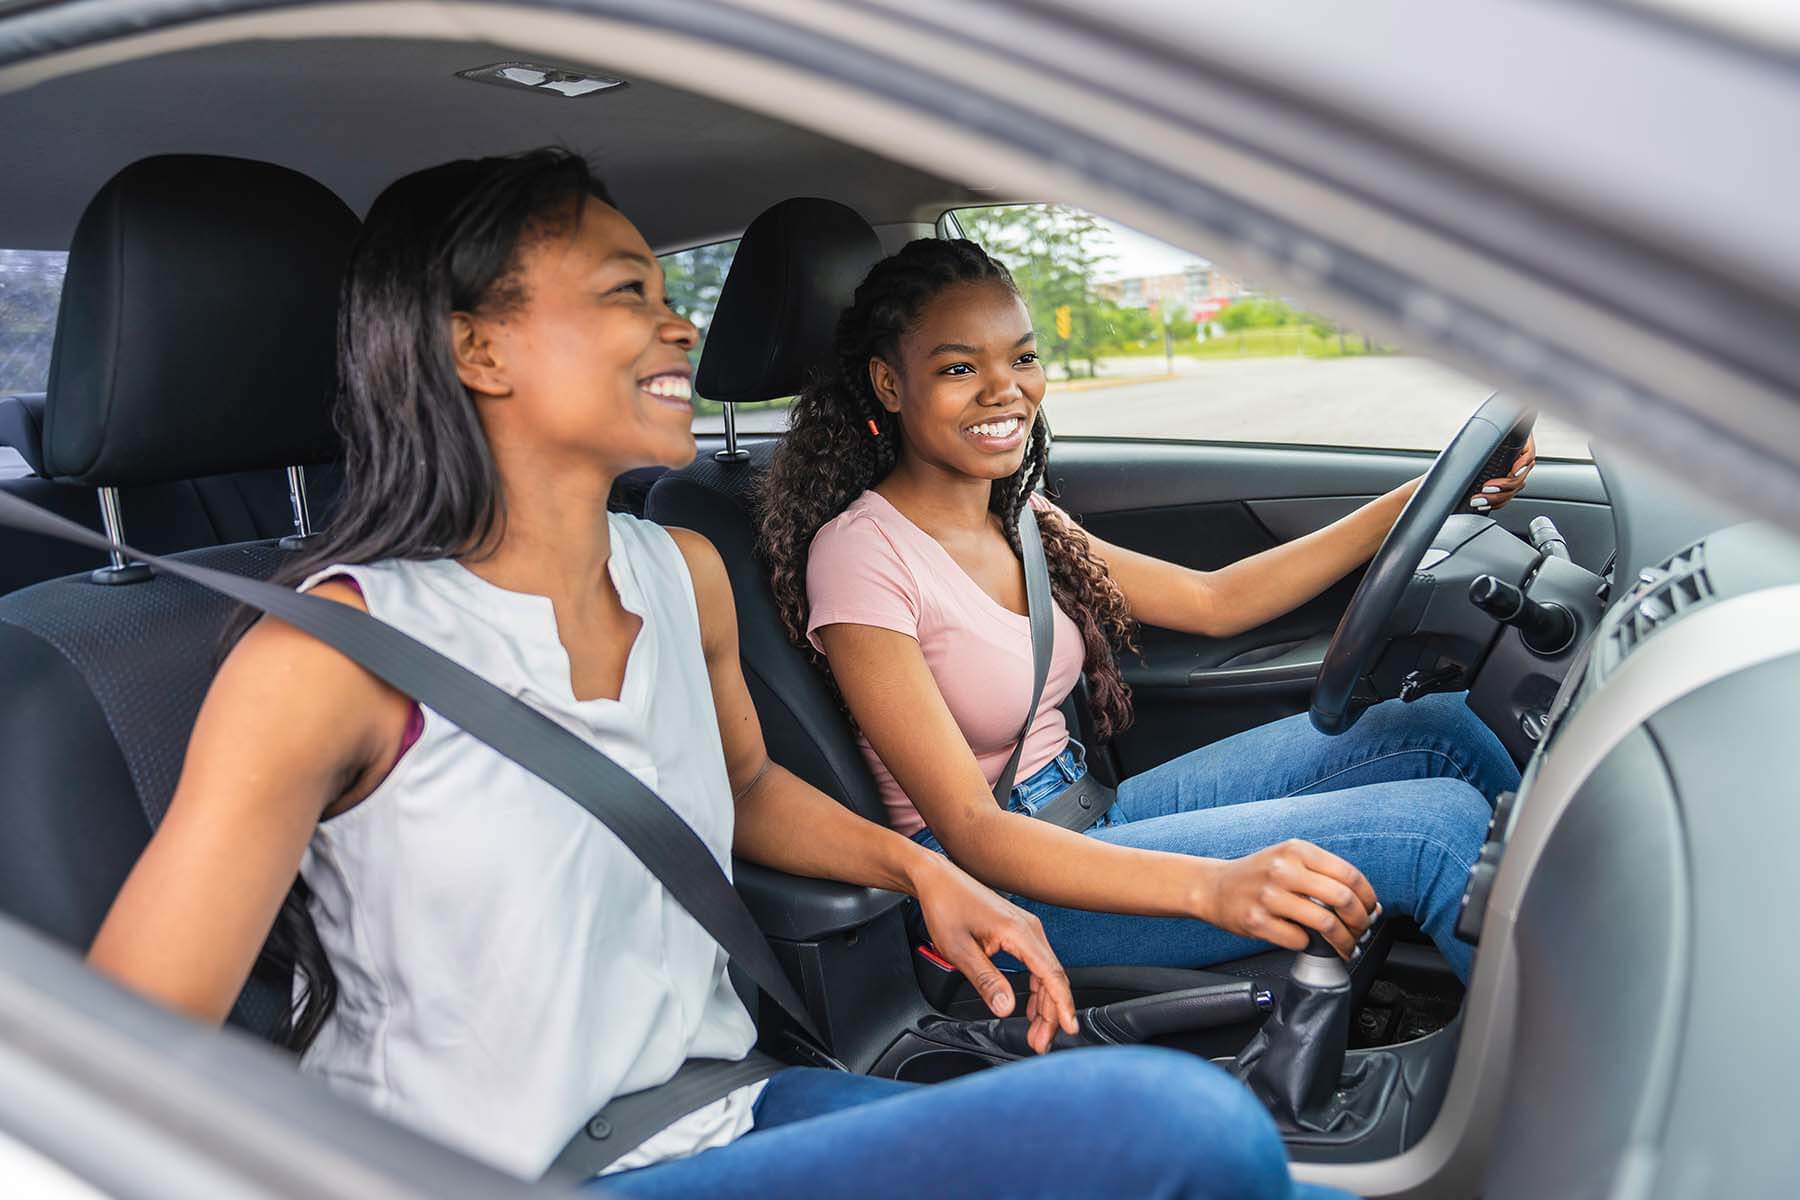 Best cars for teens 15 vehicles under $20K with top safety ratings image